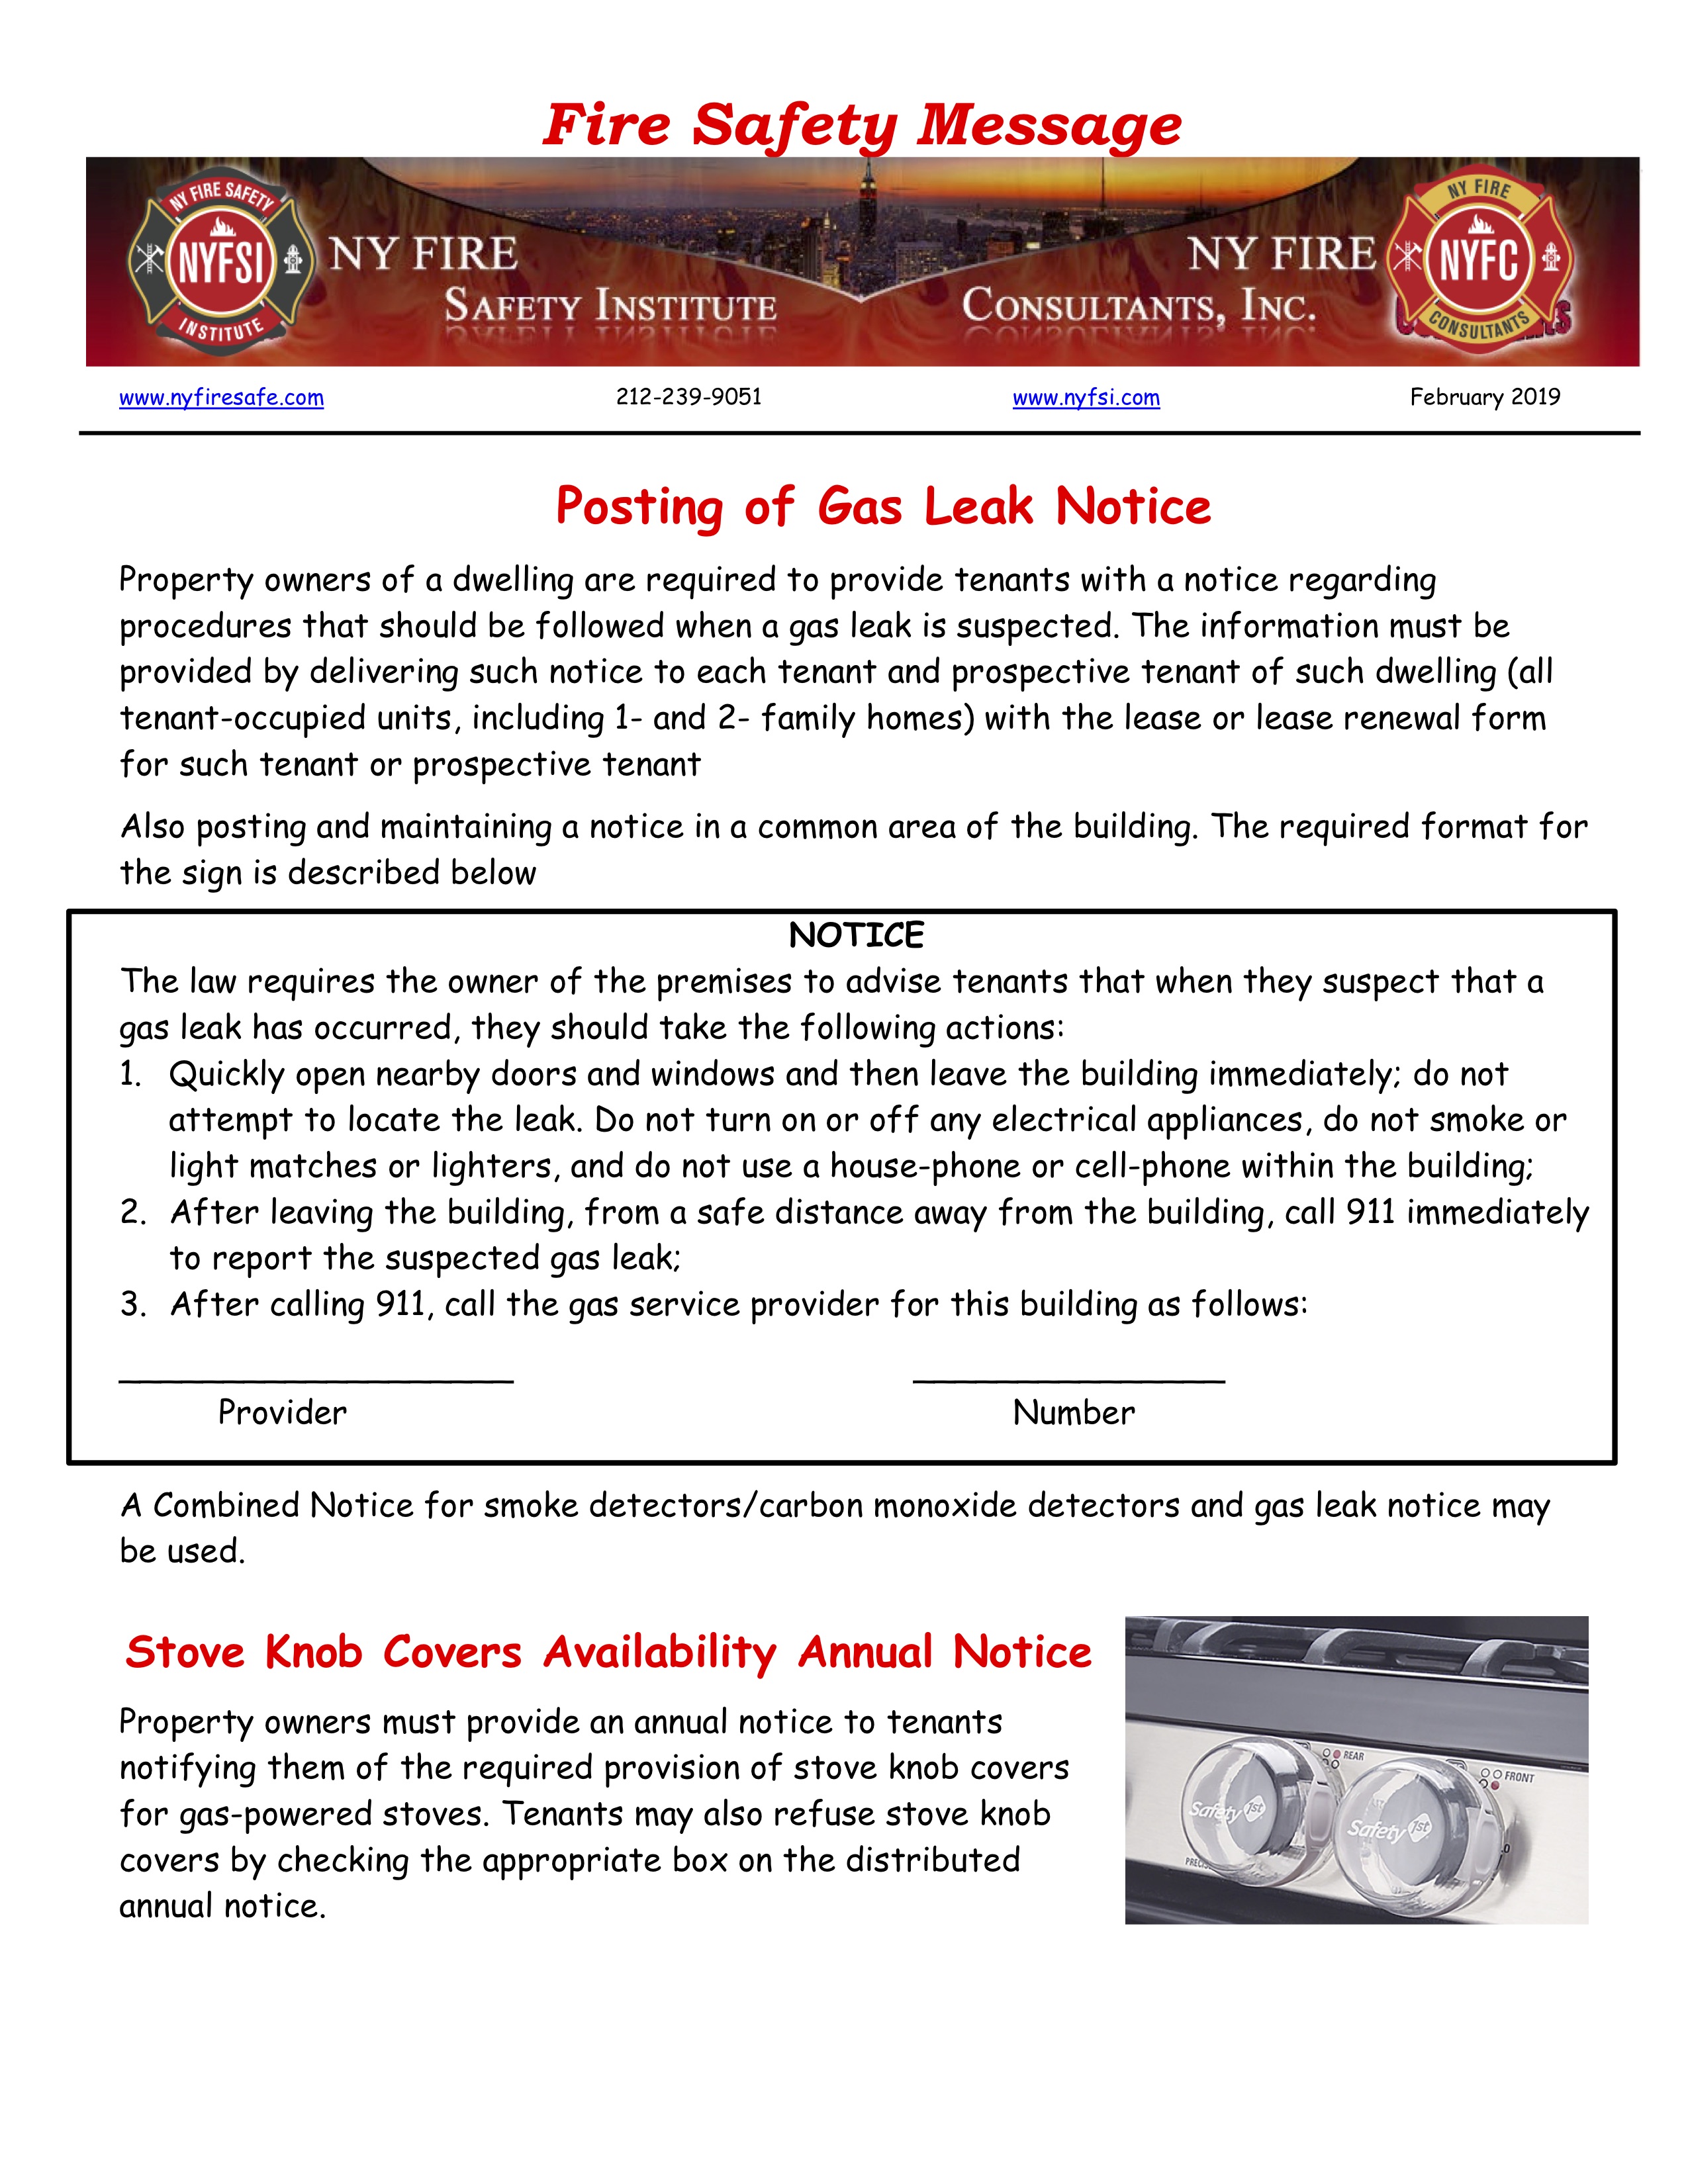 Fire Safety Message February 2019 – NY Fire Consultants Inc.